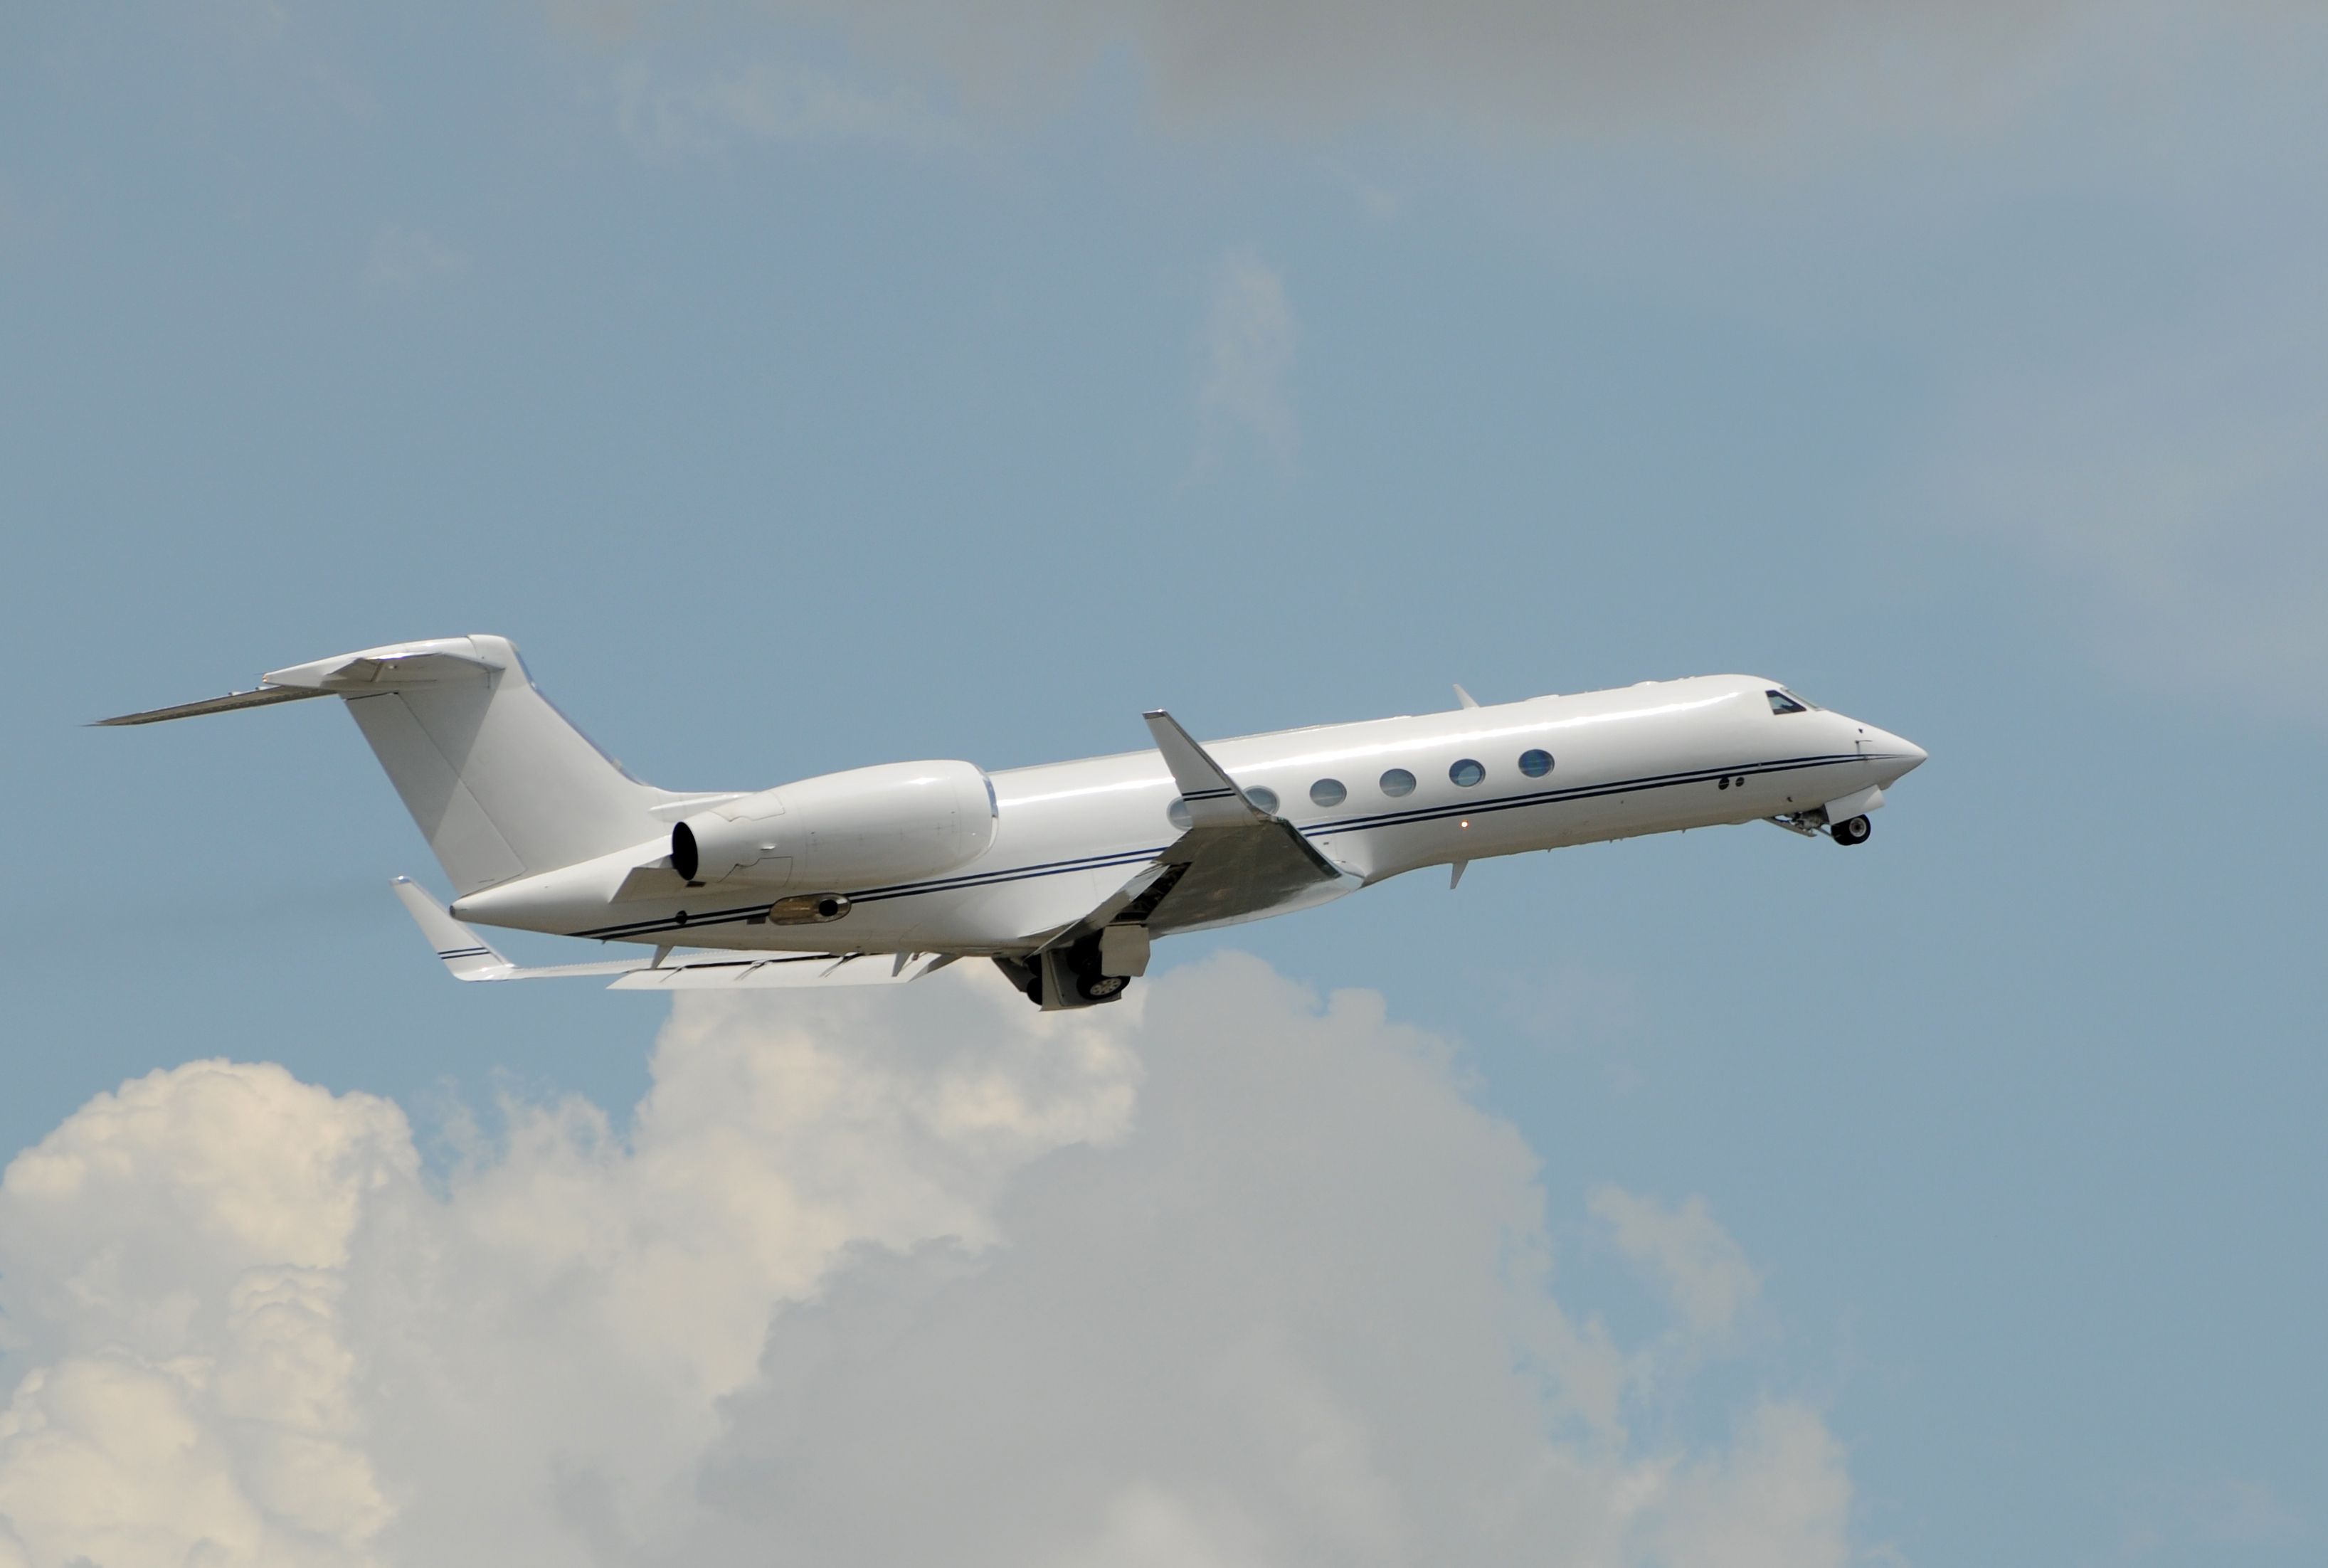 A Business jet flying in the sky while retracting its landing gear.